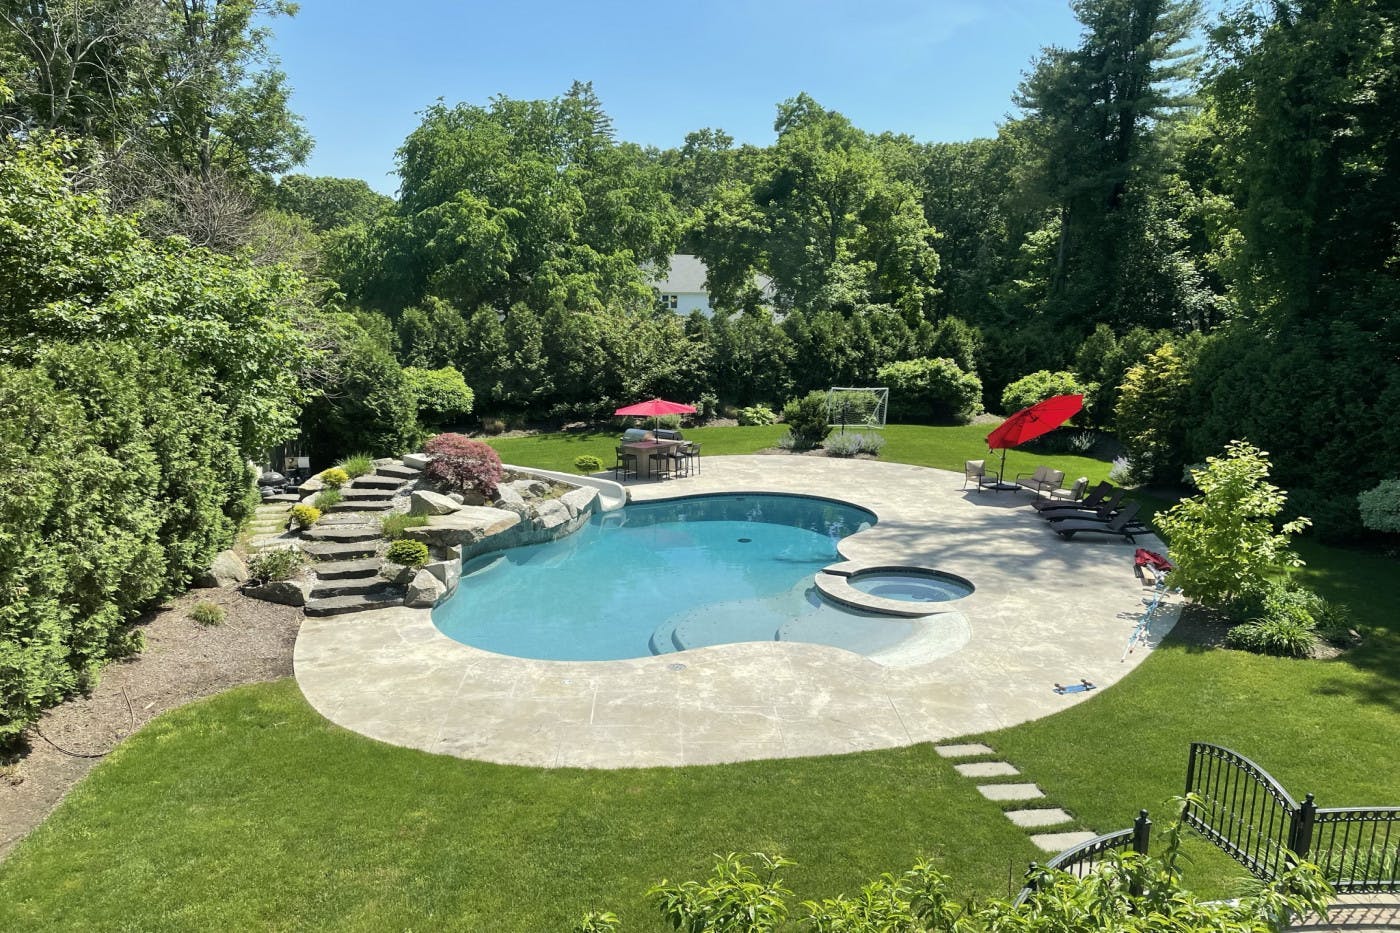 Gorgeous heated backyard pool with privacy